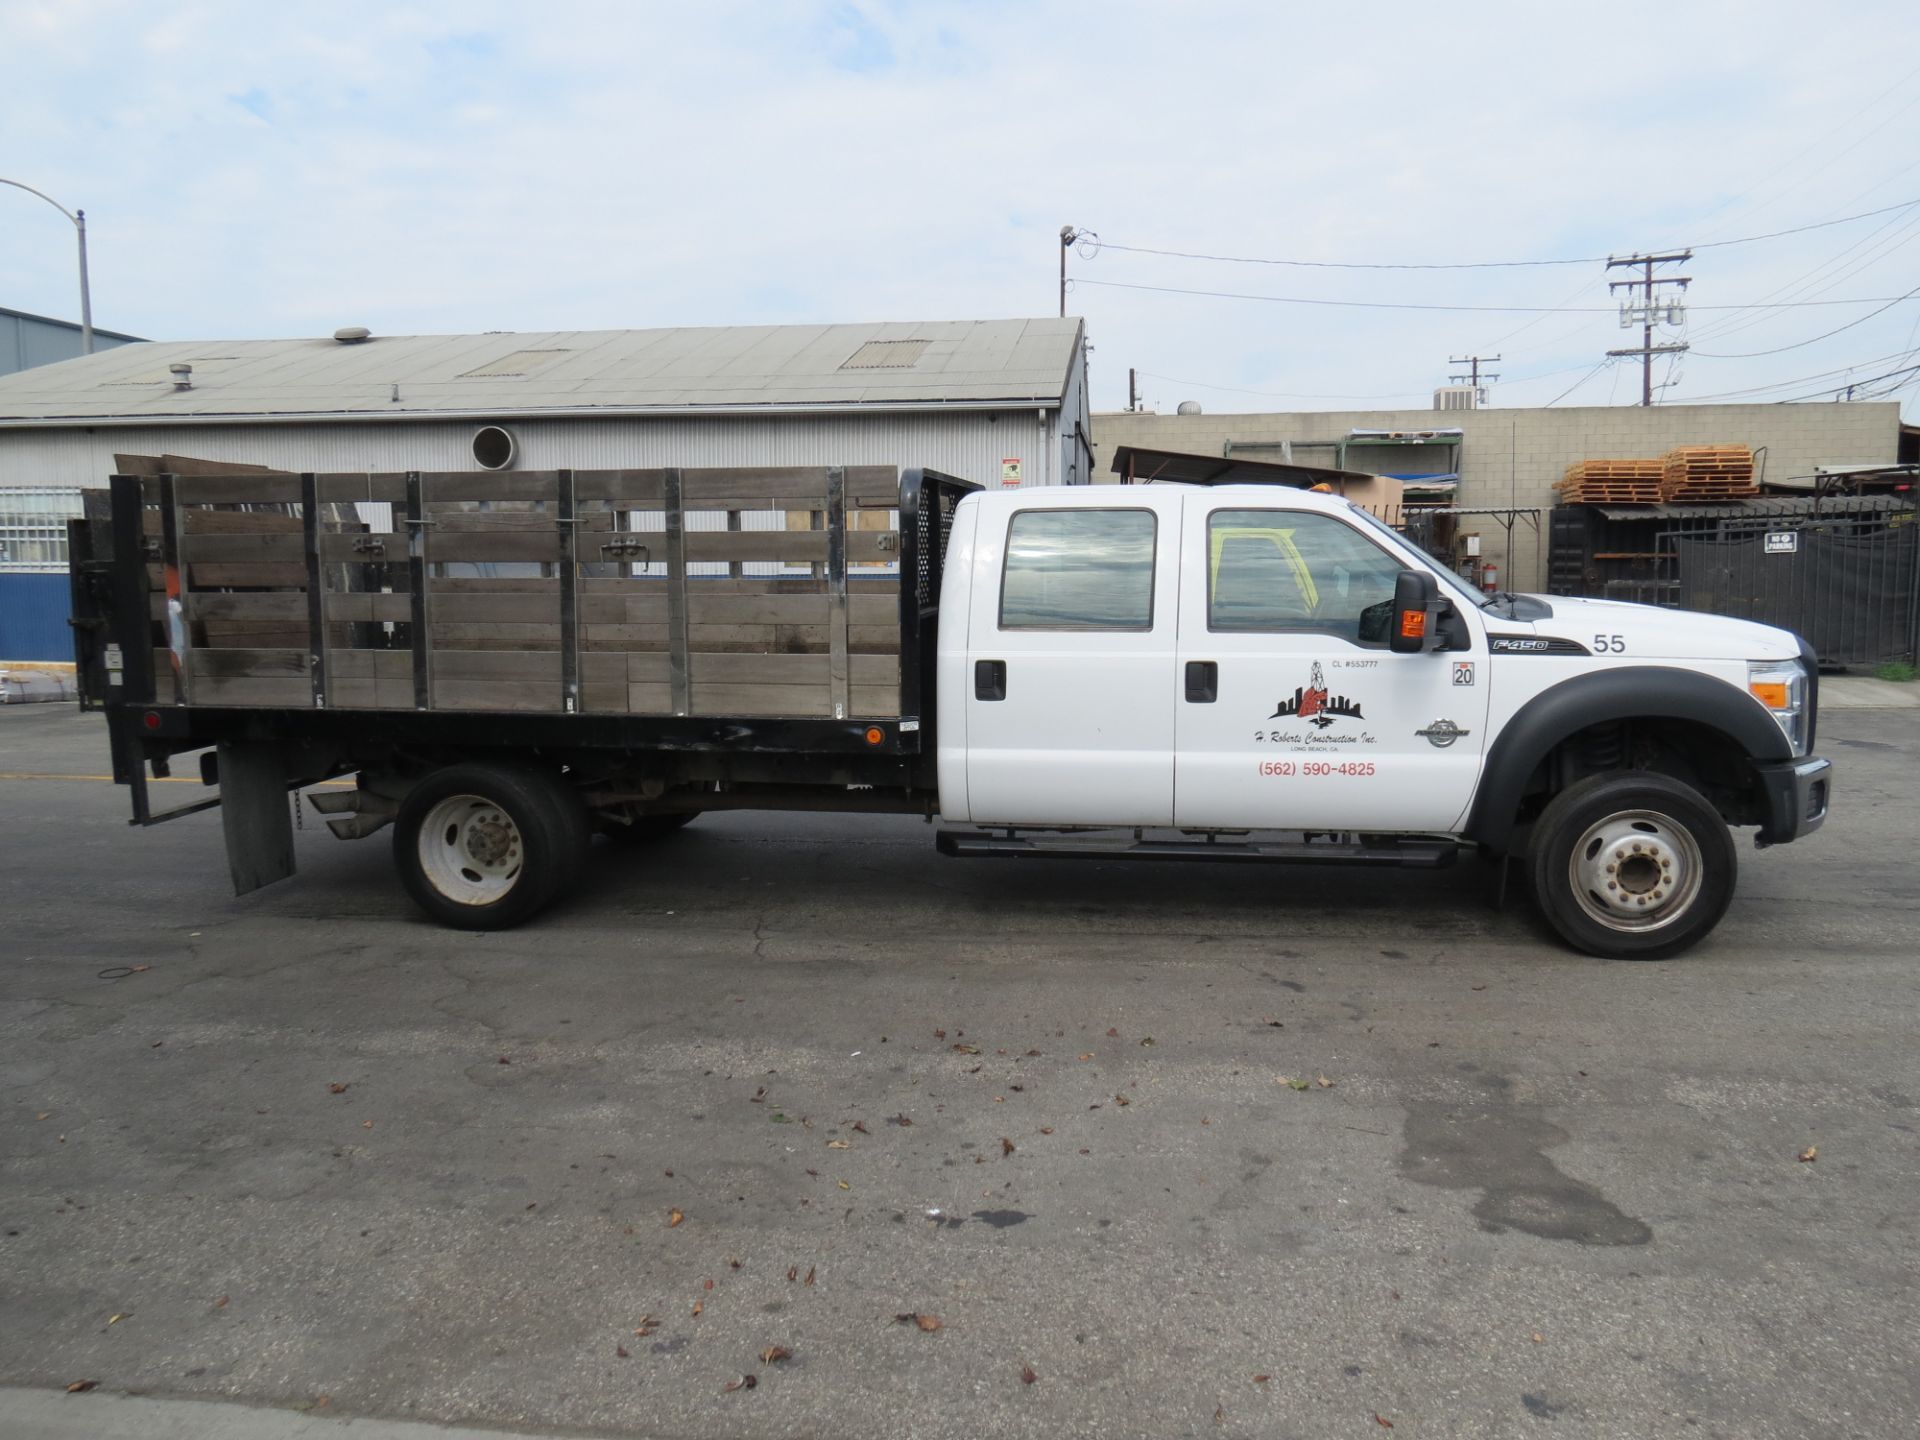 2015 Ford F-450 SUPER DUTY STAKE BED TRUCK, WITH LIFT GATE, SUPER CREW CAB , 6.7 POWER STROKE DIESEL - Image 5 of 34